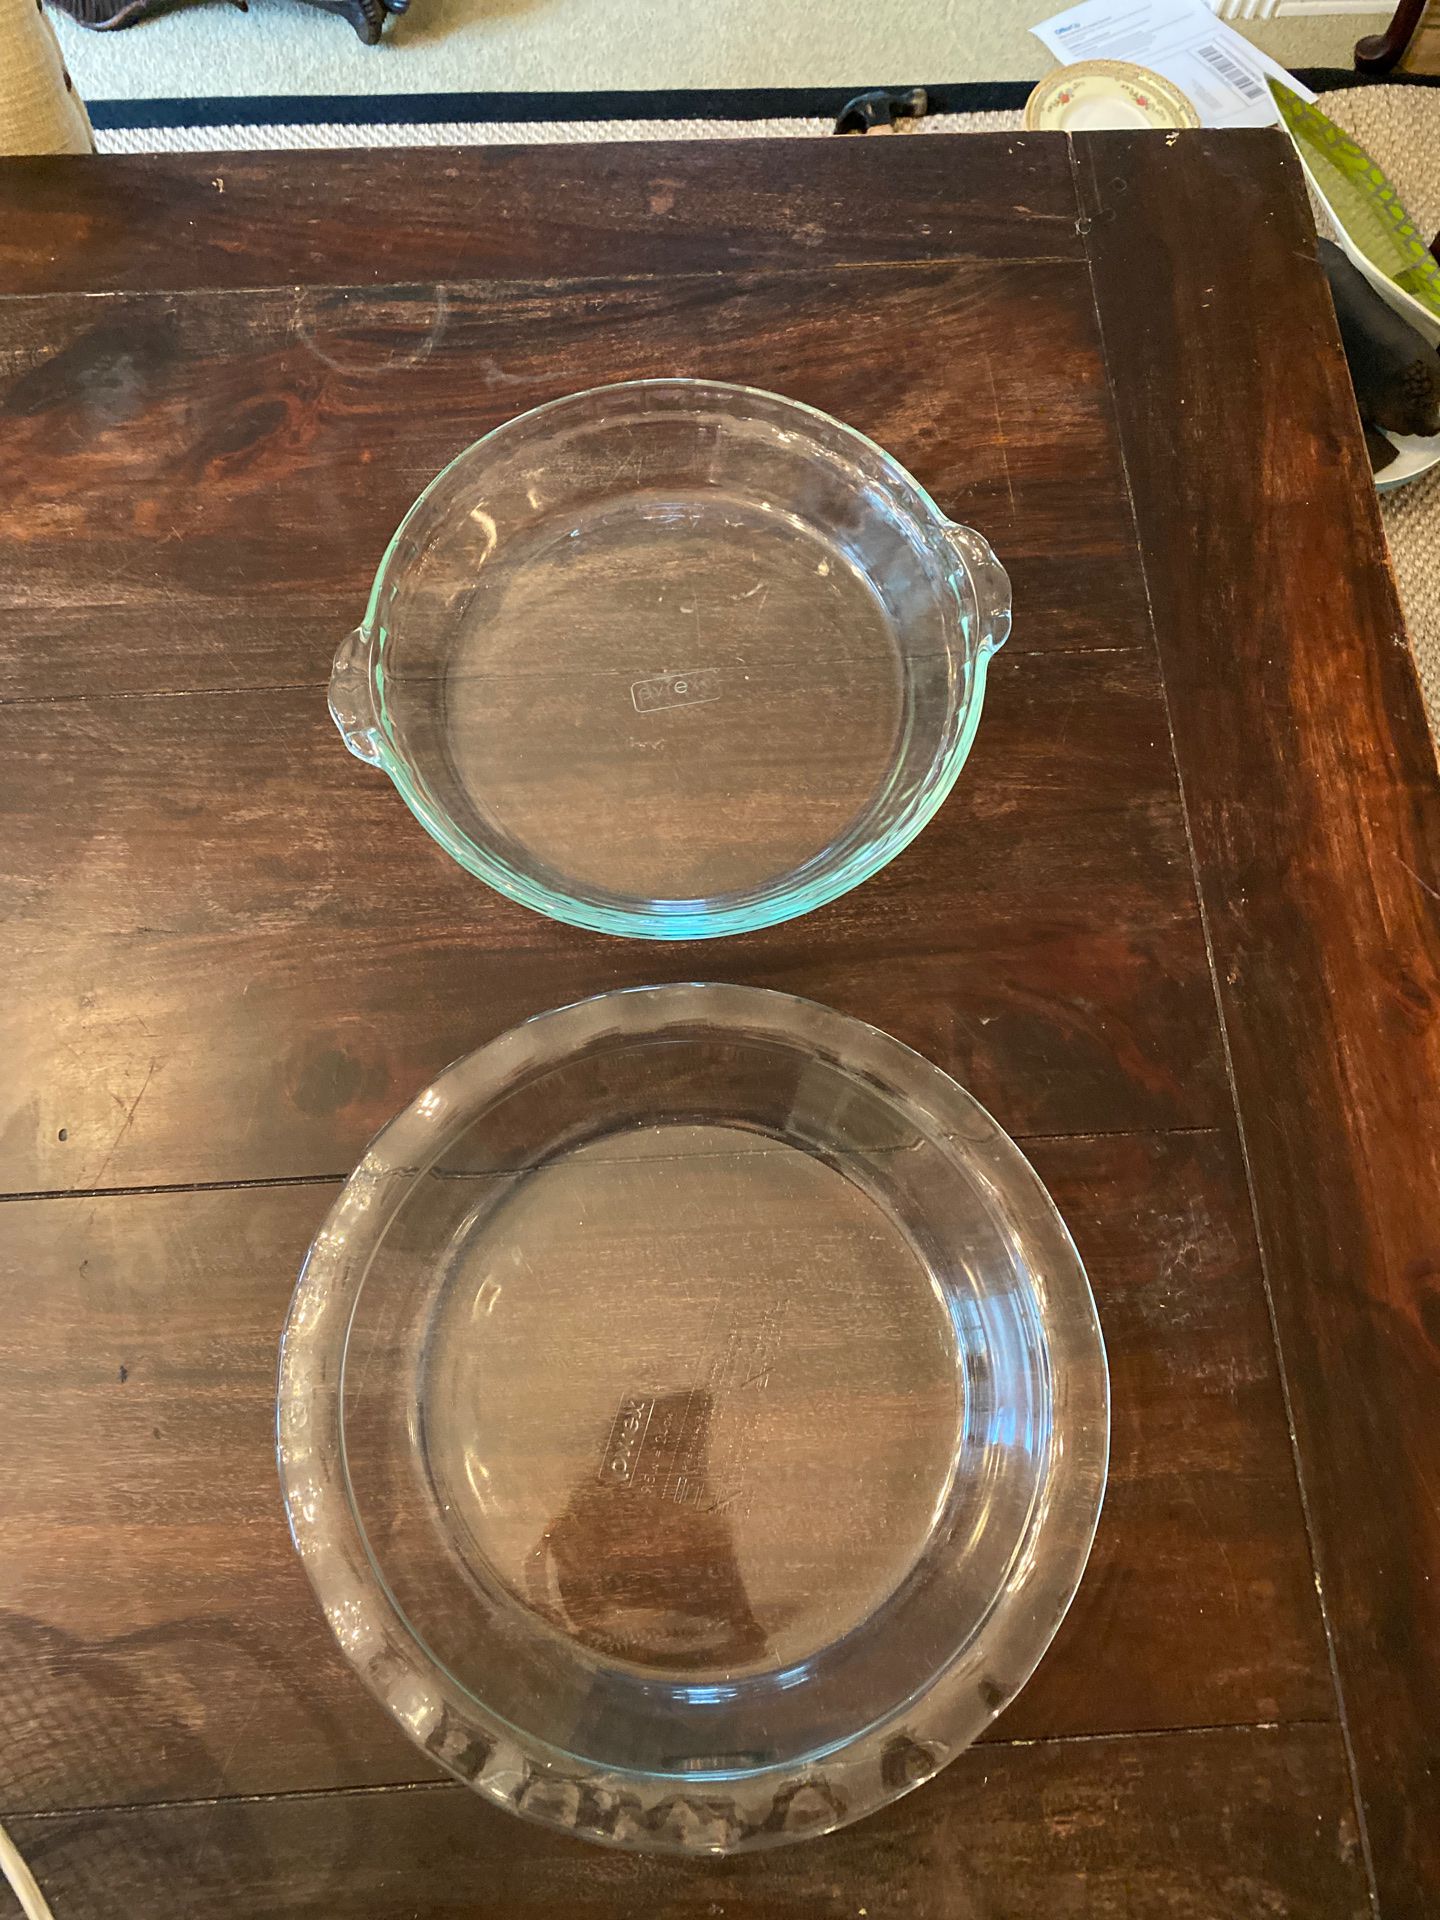 2 Pyrex pie plates / dishes